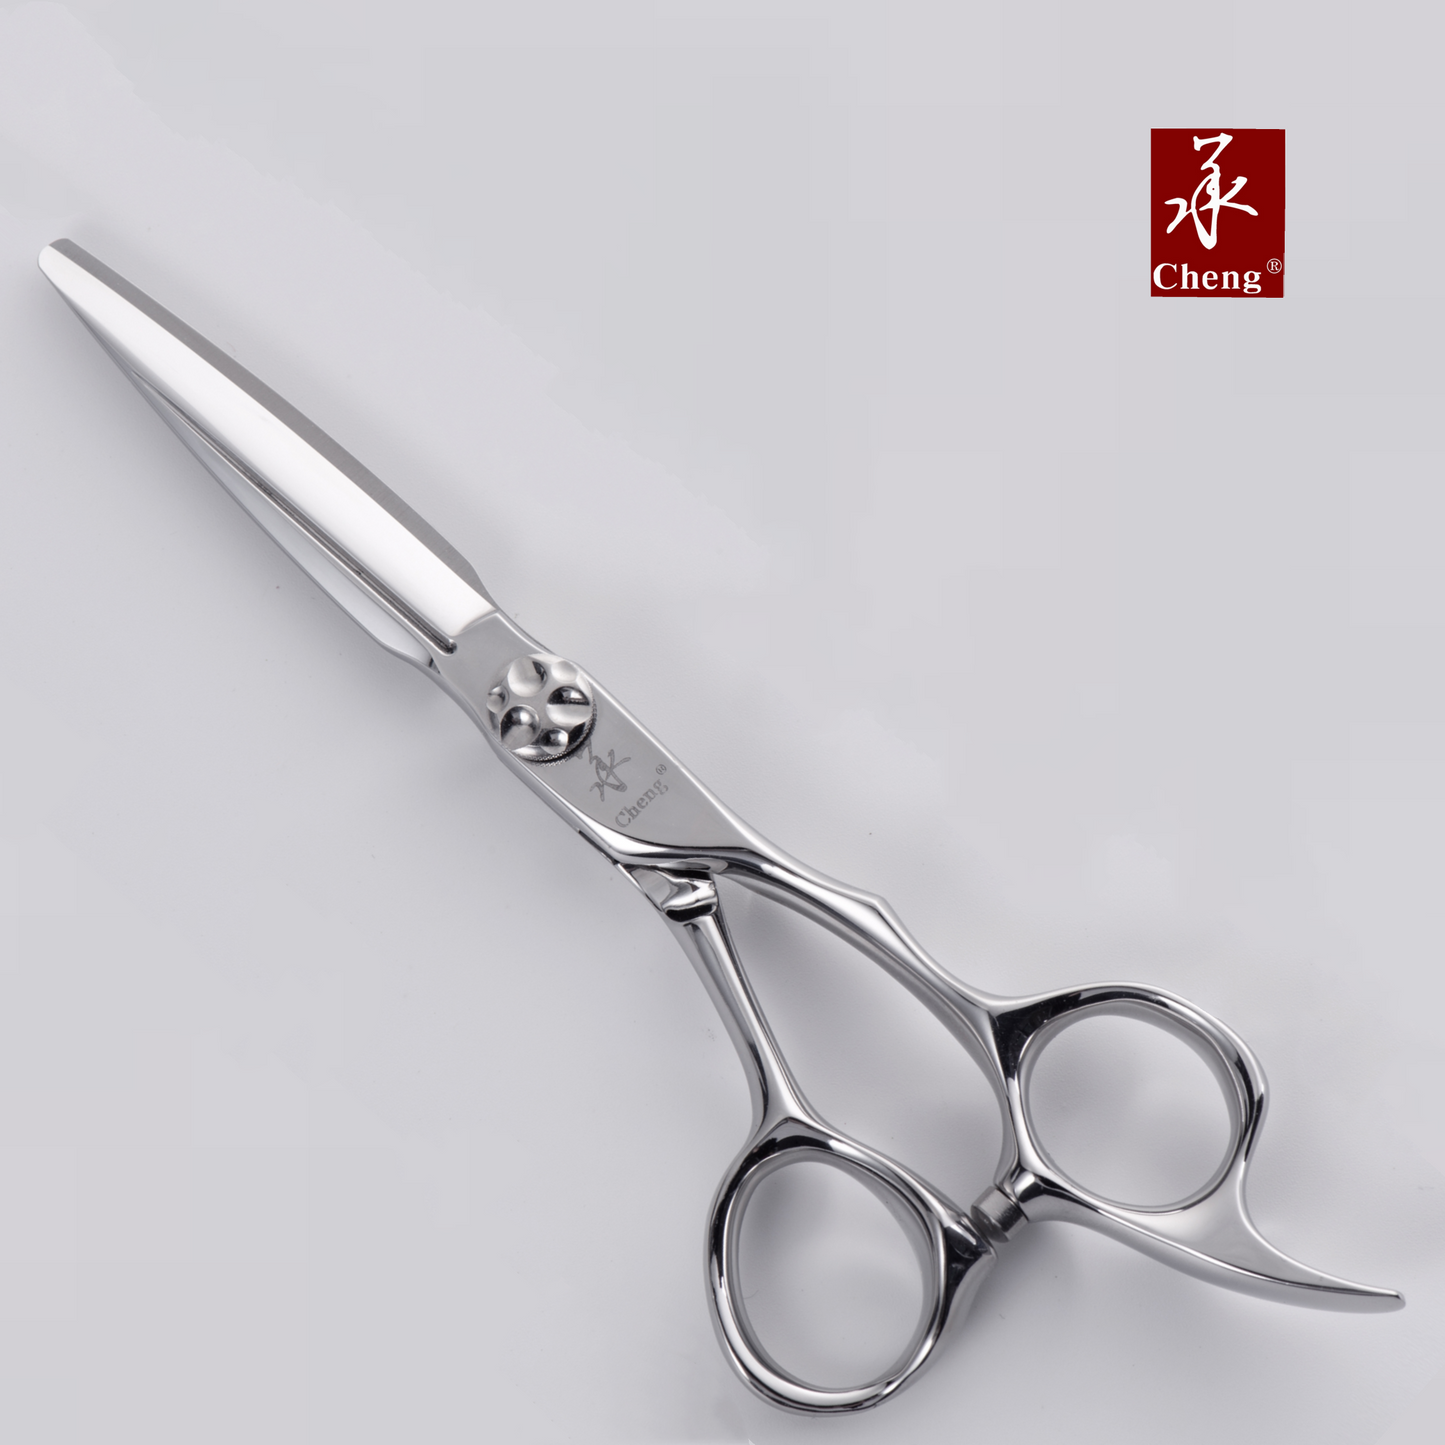 VD-614TZX Hair Thinning Scissors 6.0Inch 14T About=45%